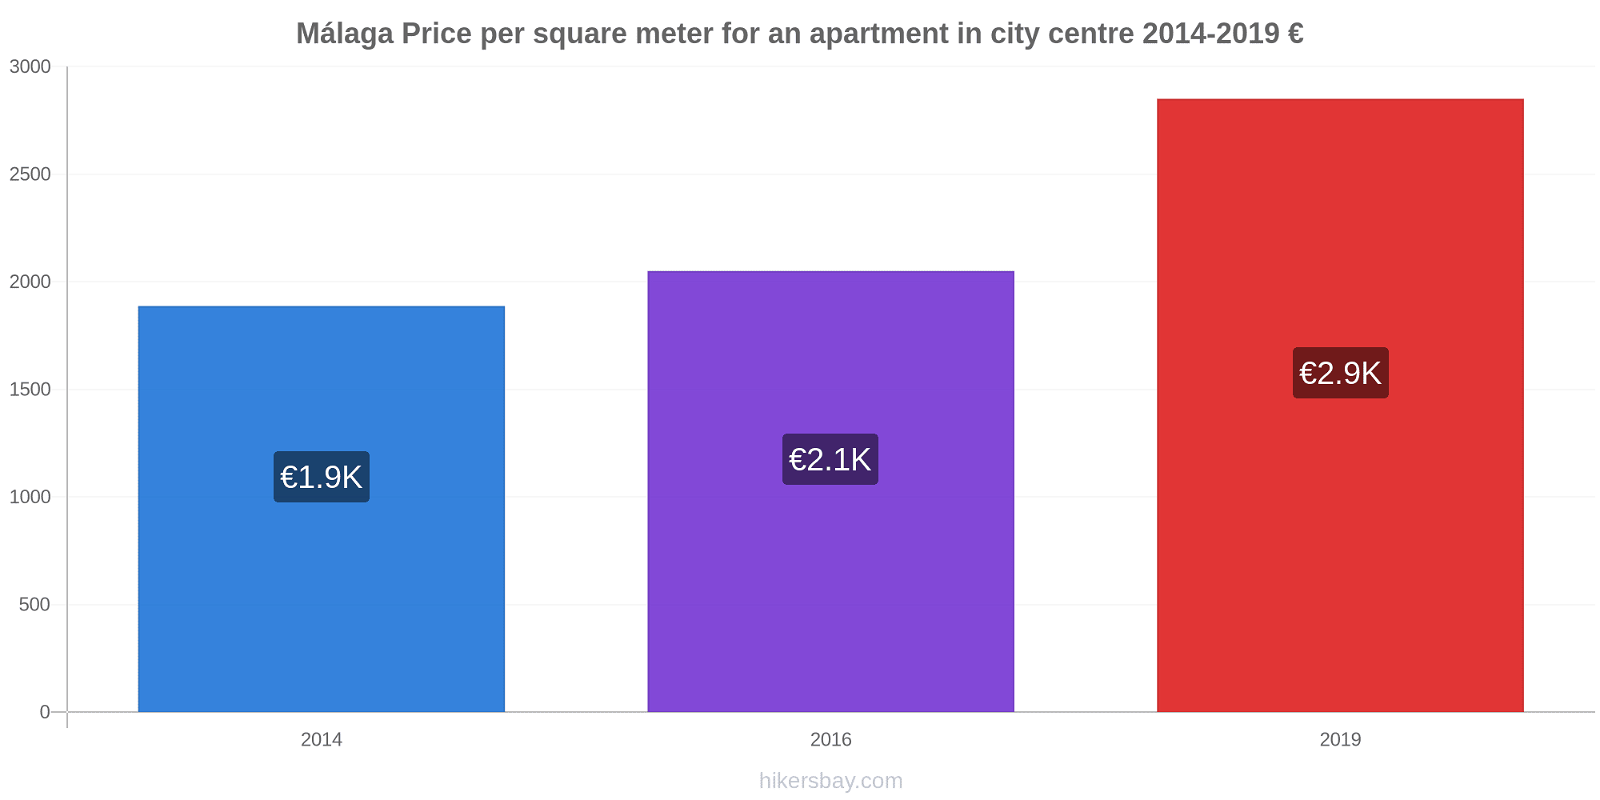 Málaga price changes Price per square meter for an apartment in city centre hikersbay.com